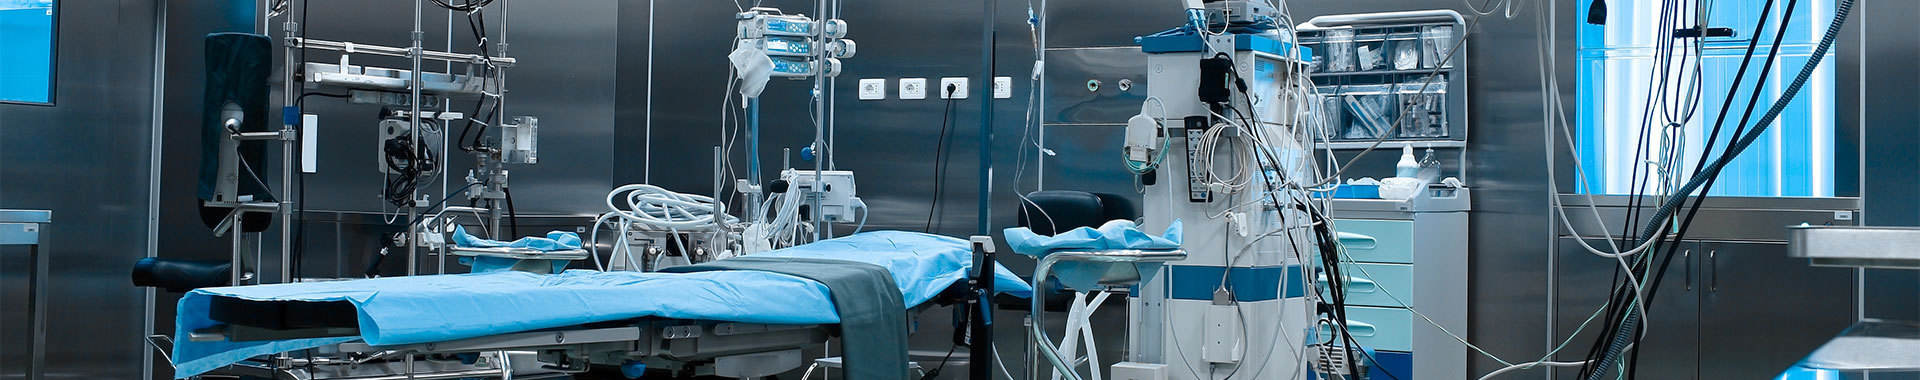 Advanced medical devices in a healthcare facility